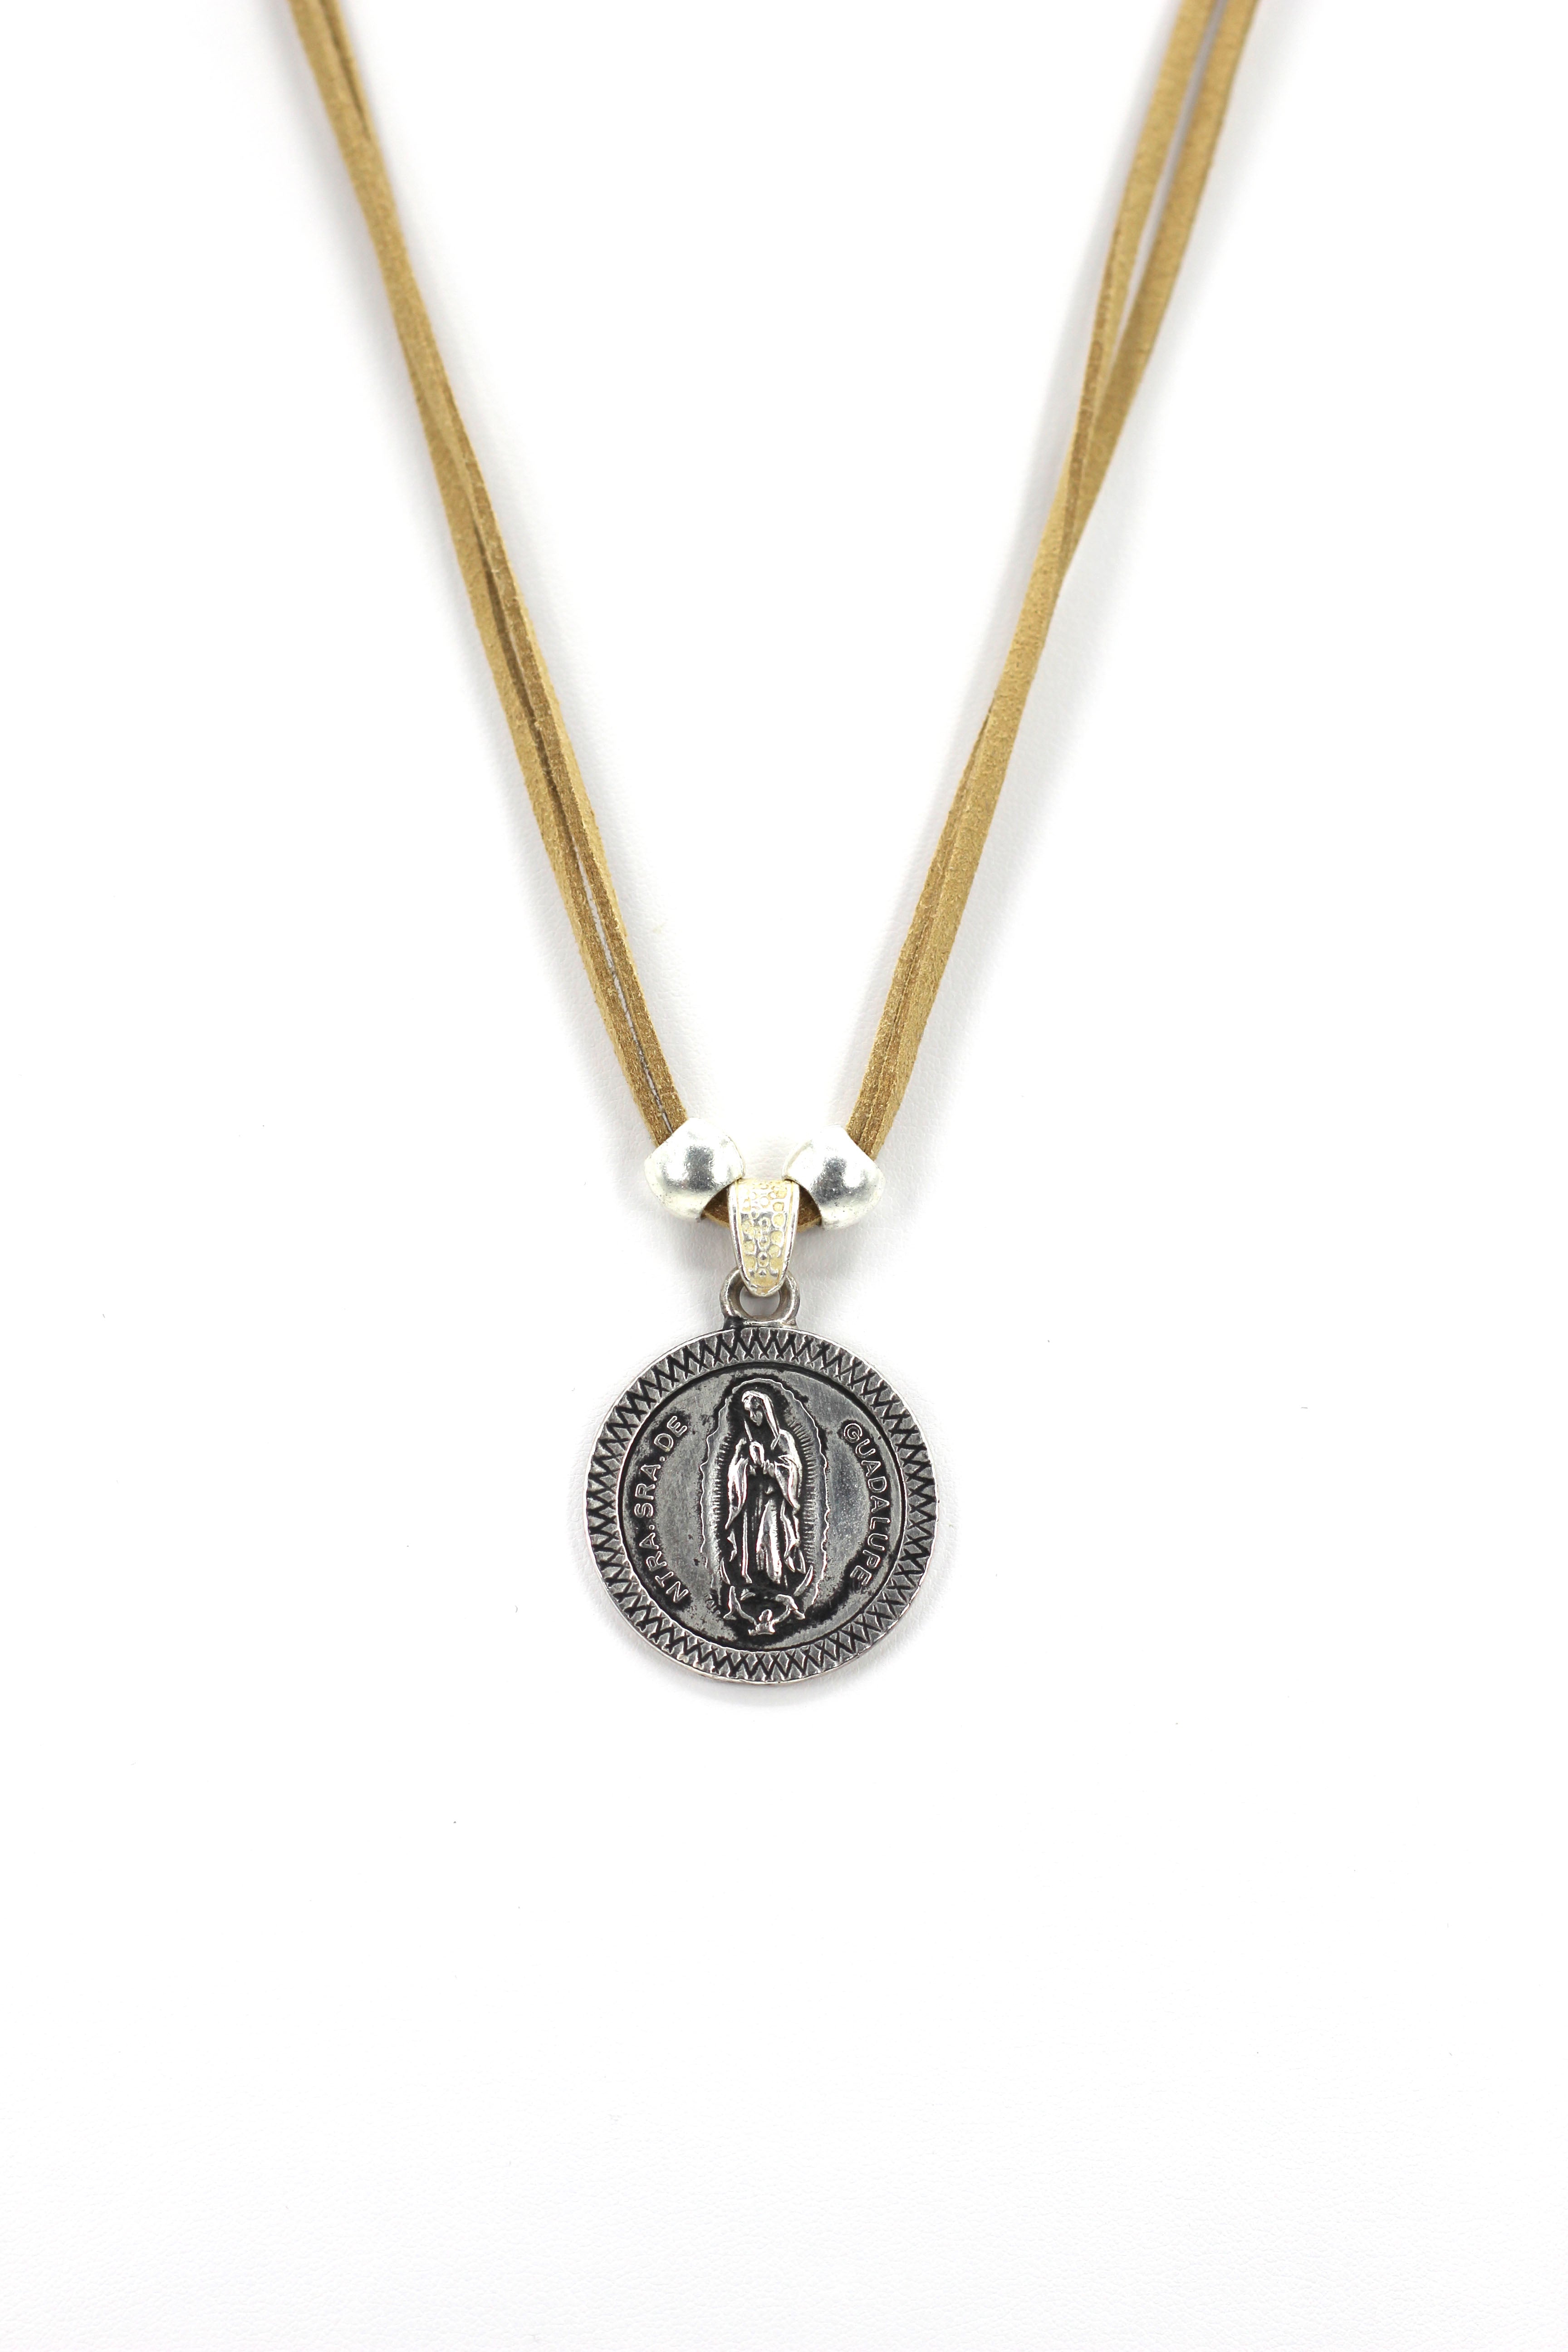 Vintage Medallion Necklace of Our Lady Of Guadalupe - Nuestra Sra de Guadalupe Jewelry with Genuine Leather strap by Graciela's Collection